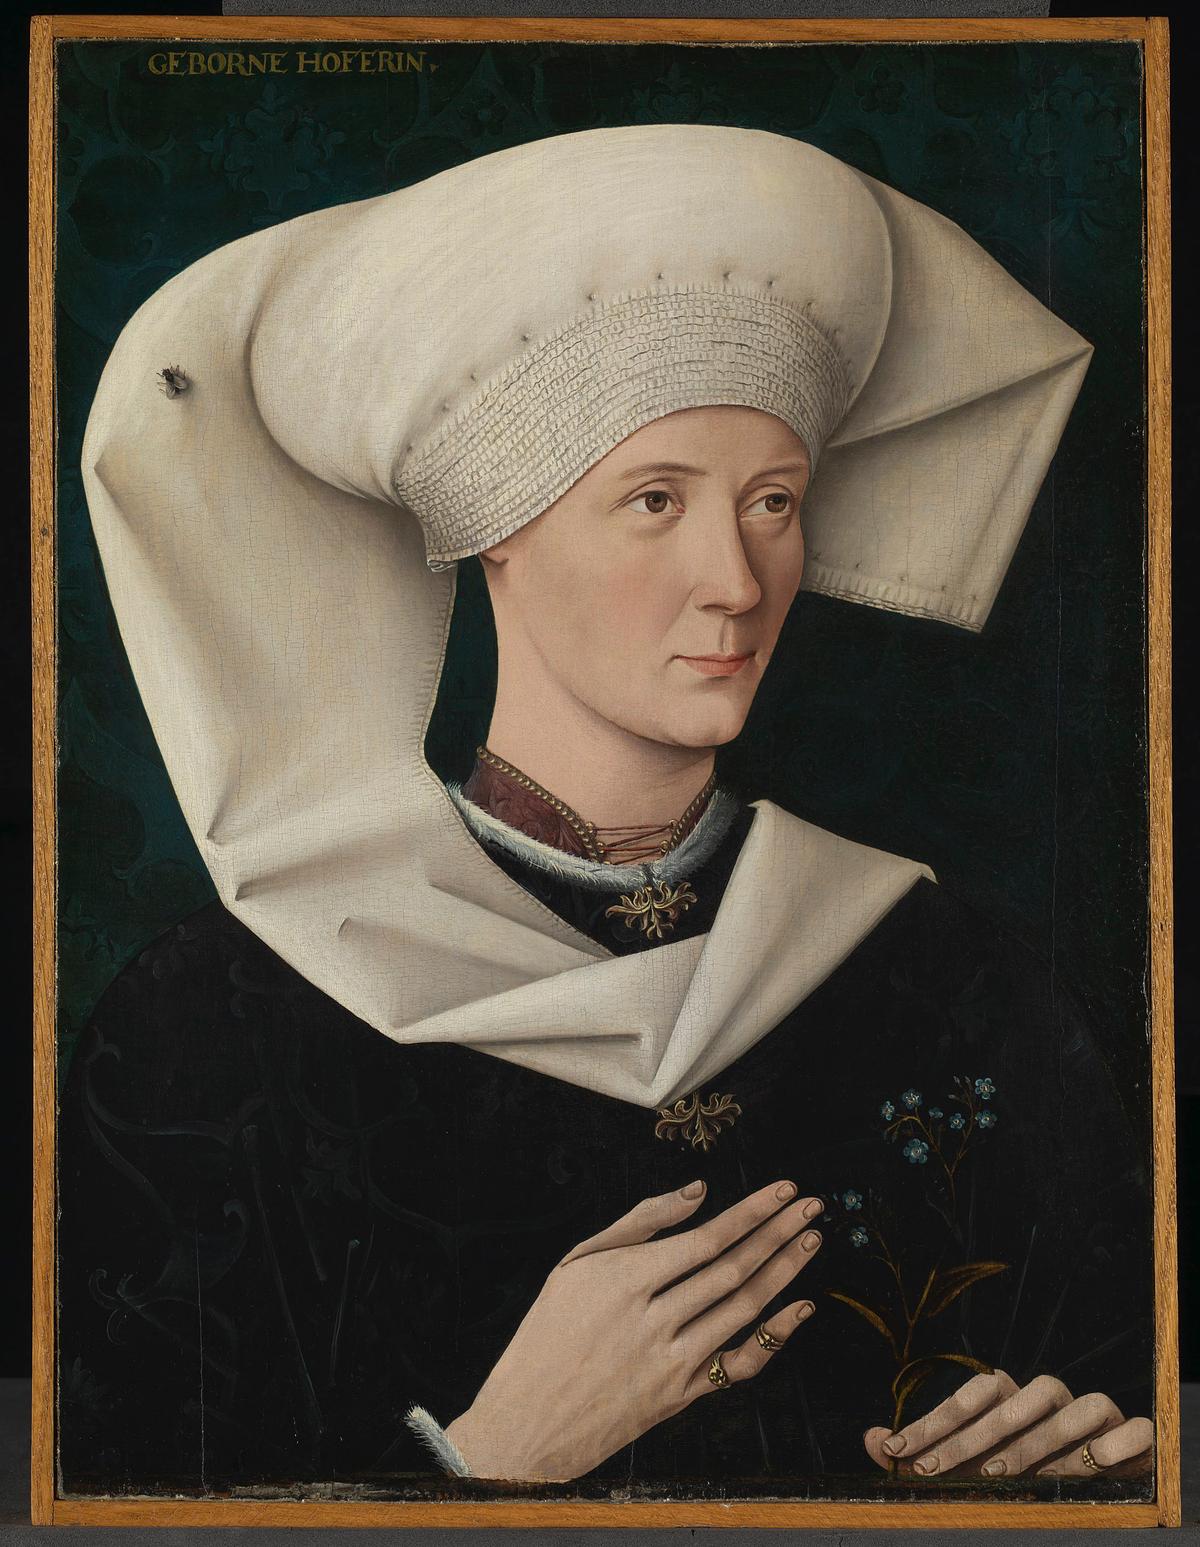 The 15th-century painting "Portrait of a Woman from the Hofer Family" at London's National Gallery. (NG722 Portrait of a Woman of the Hofer Family by Swabian about 1470 © The National Gallery, London)